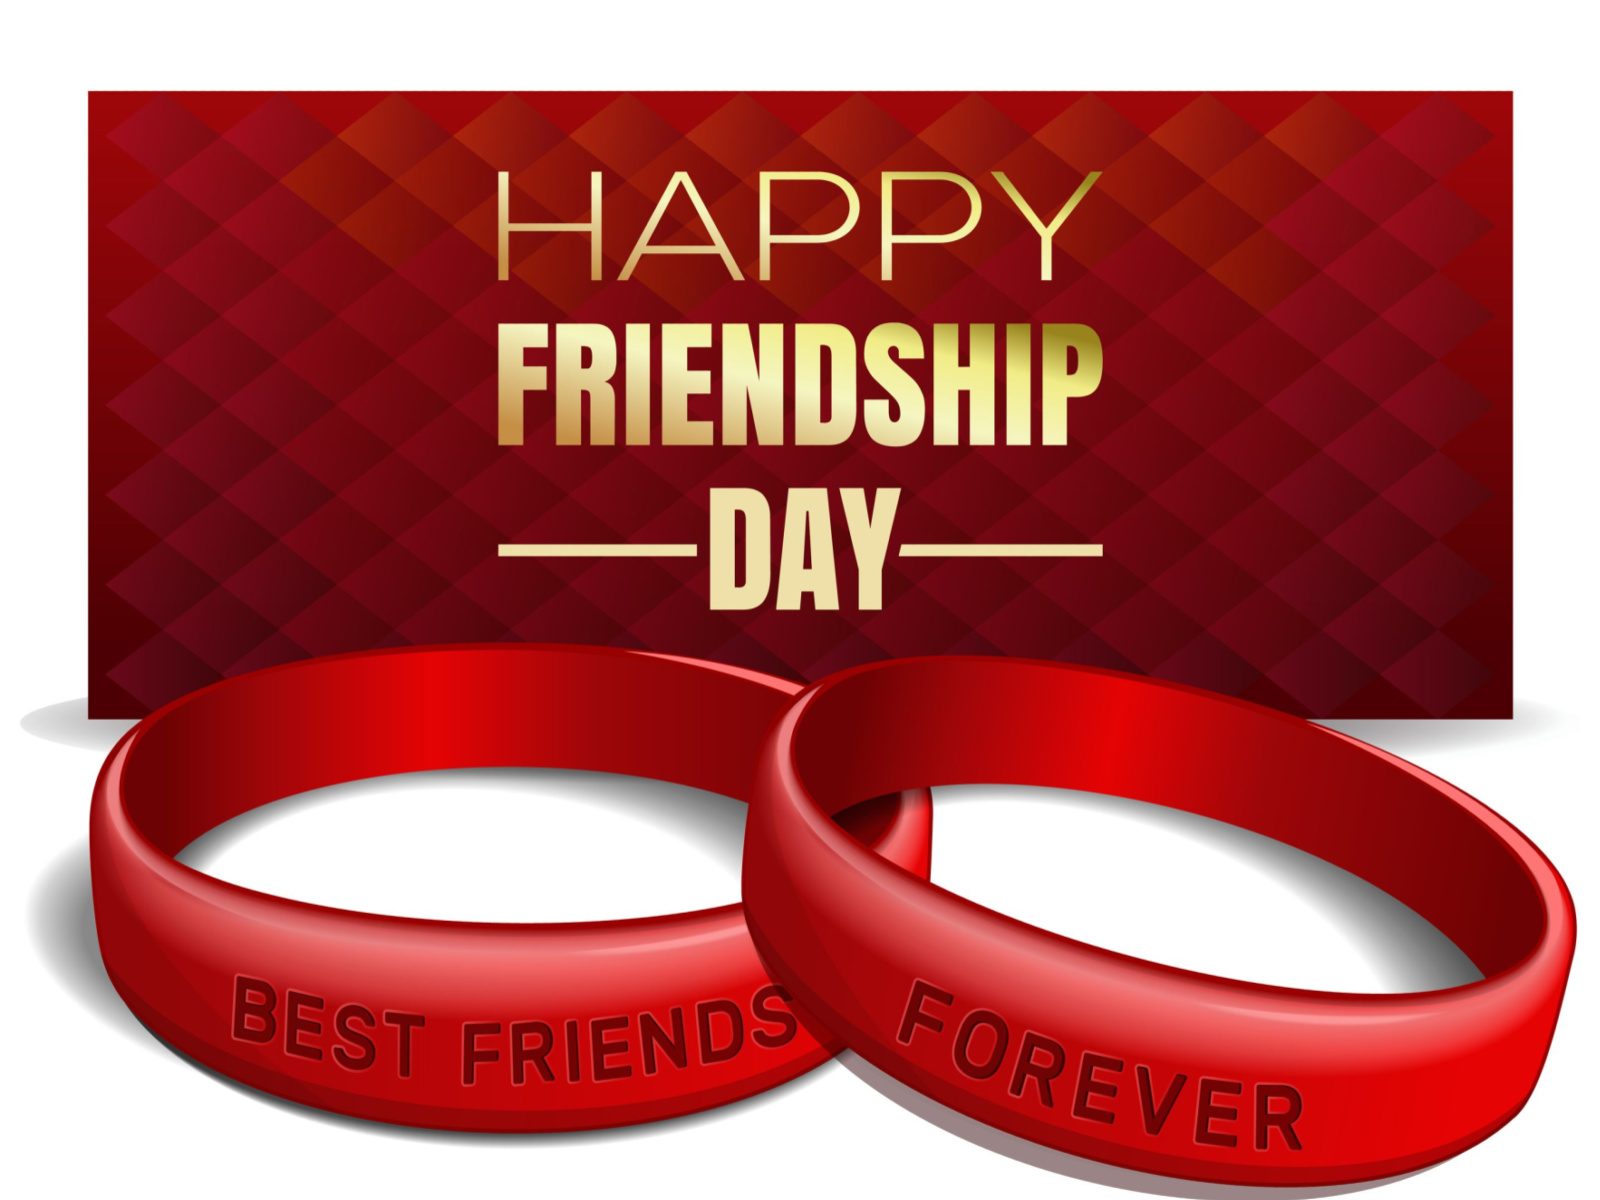 659729 Friendship Day Images Stock Photos  Vectors  Shutterstock